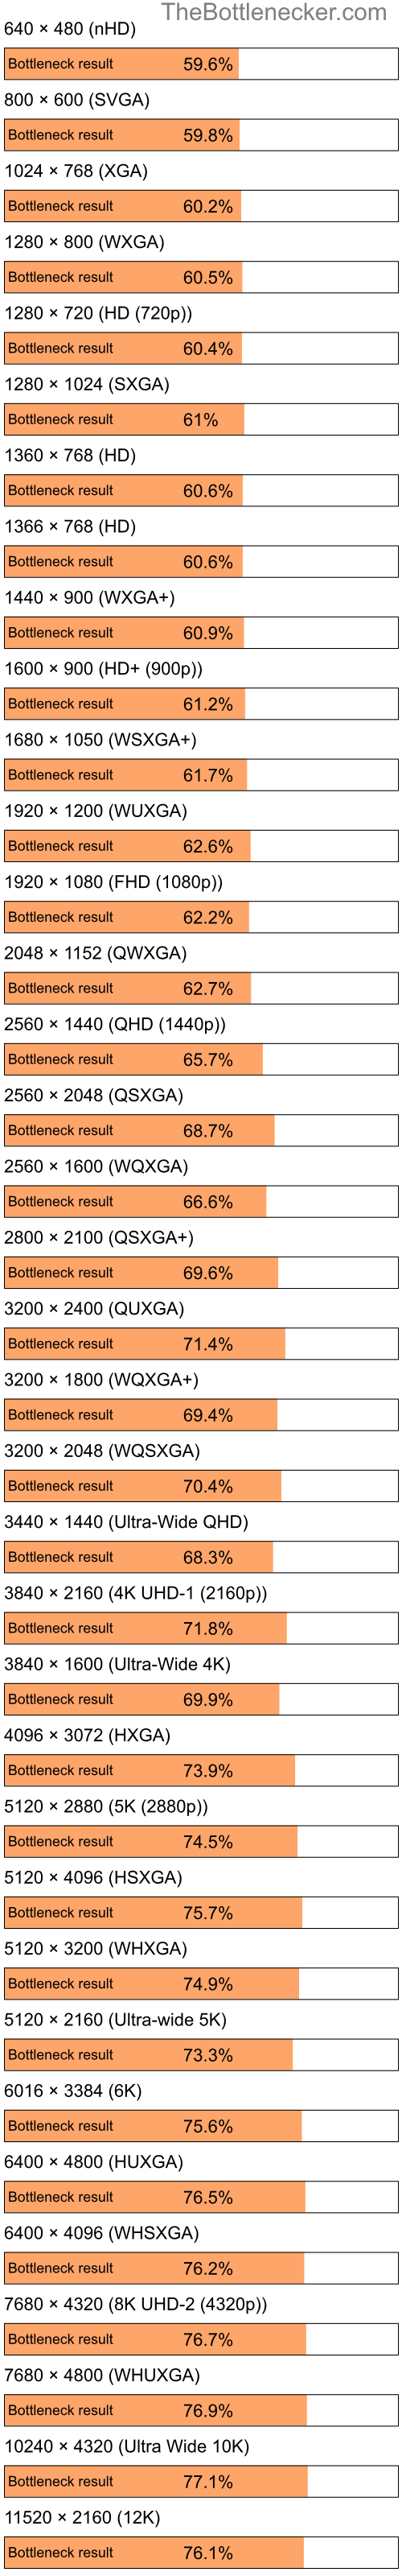 Bottleneck results by resolution for Intel Celeron M and AMD Radeon X800 XL in Processor Intense Tasks